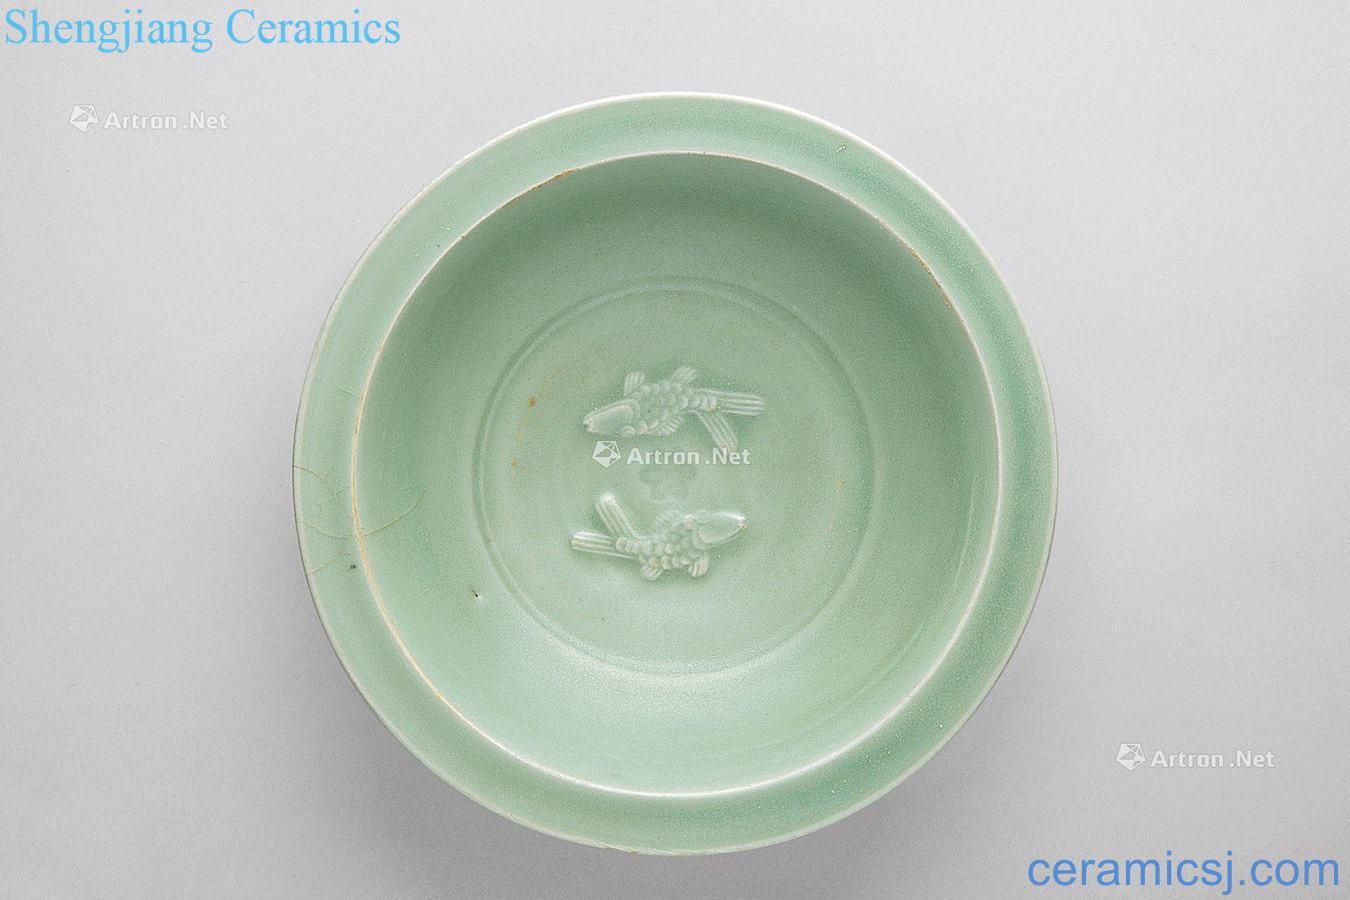 The southern song dynasty Longquan celadon Pisces plate